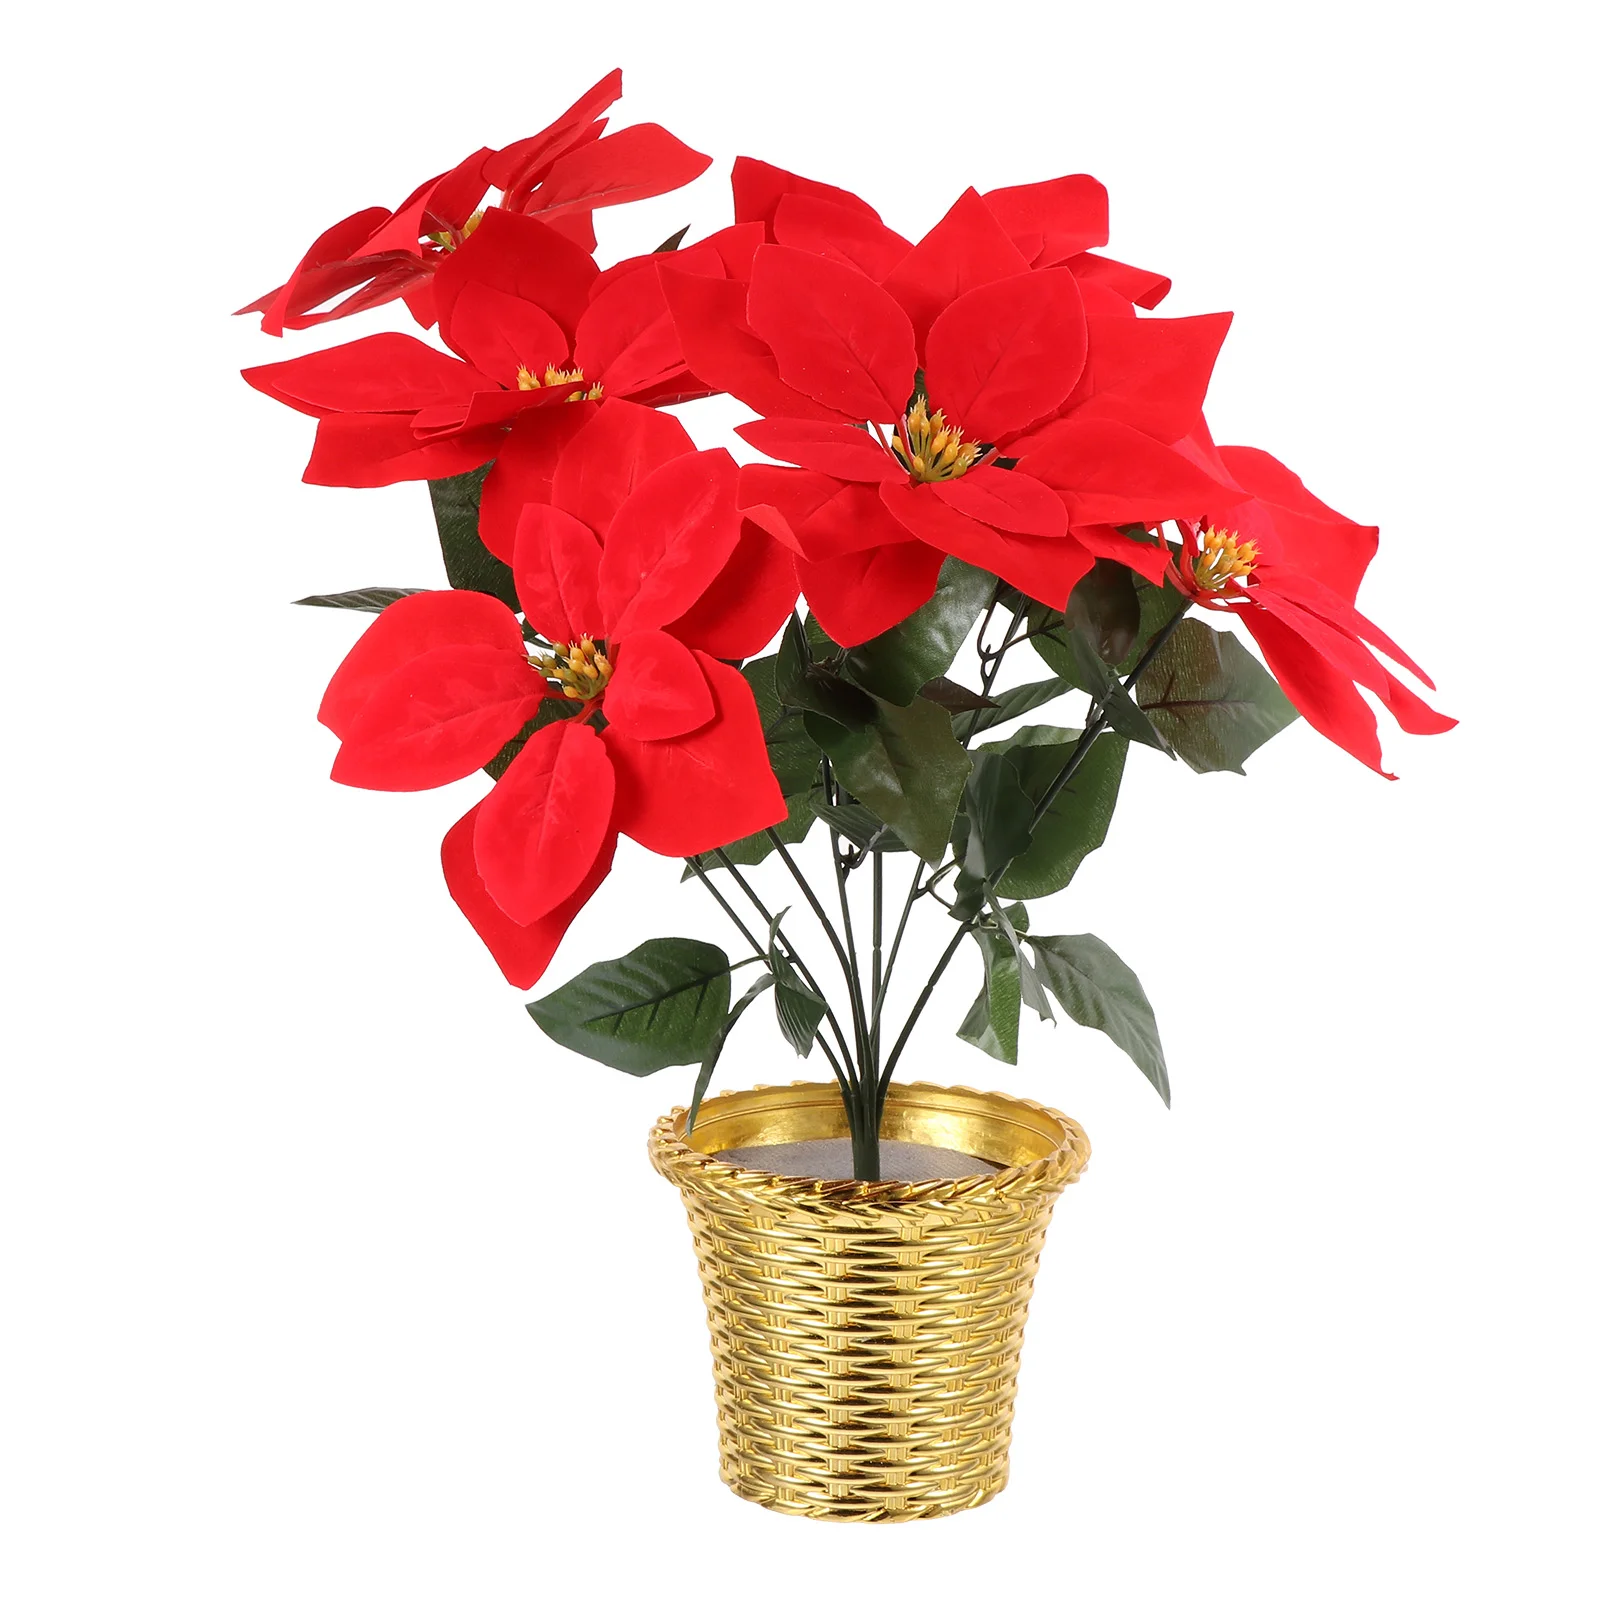 

Poinsettia Artificial Christmas Flower Potted Flowers Faux Red Fake Bouquet Ornament Poinsettias Simulation Silk Floral Party